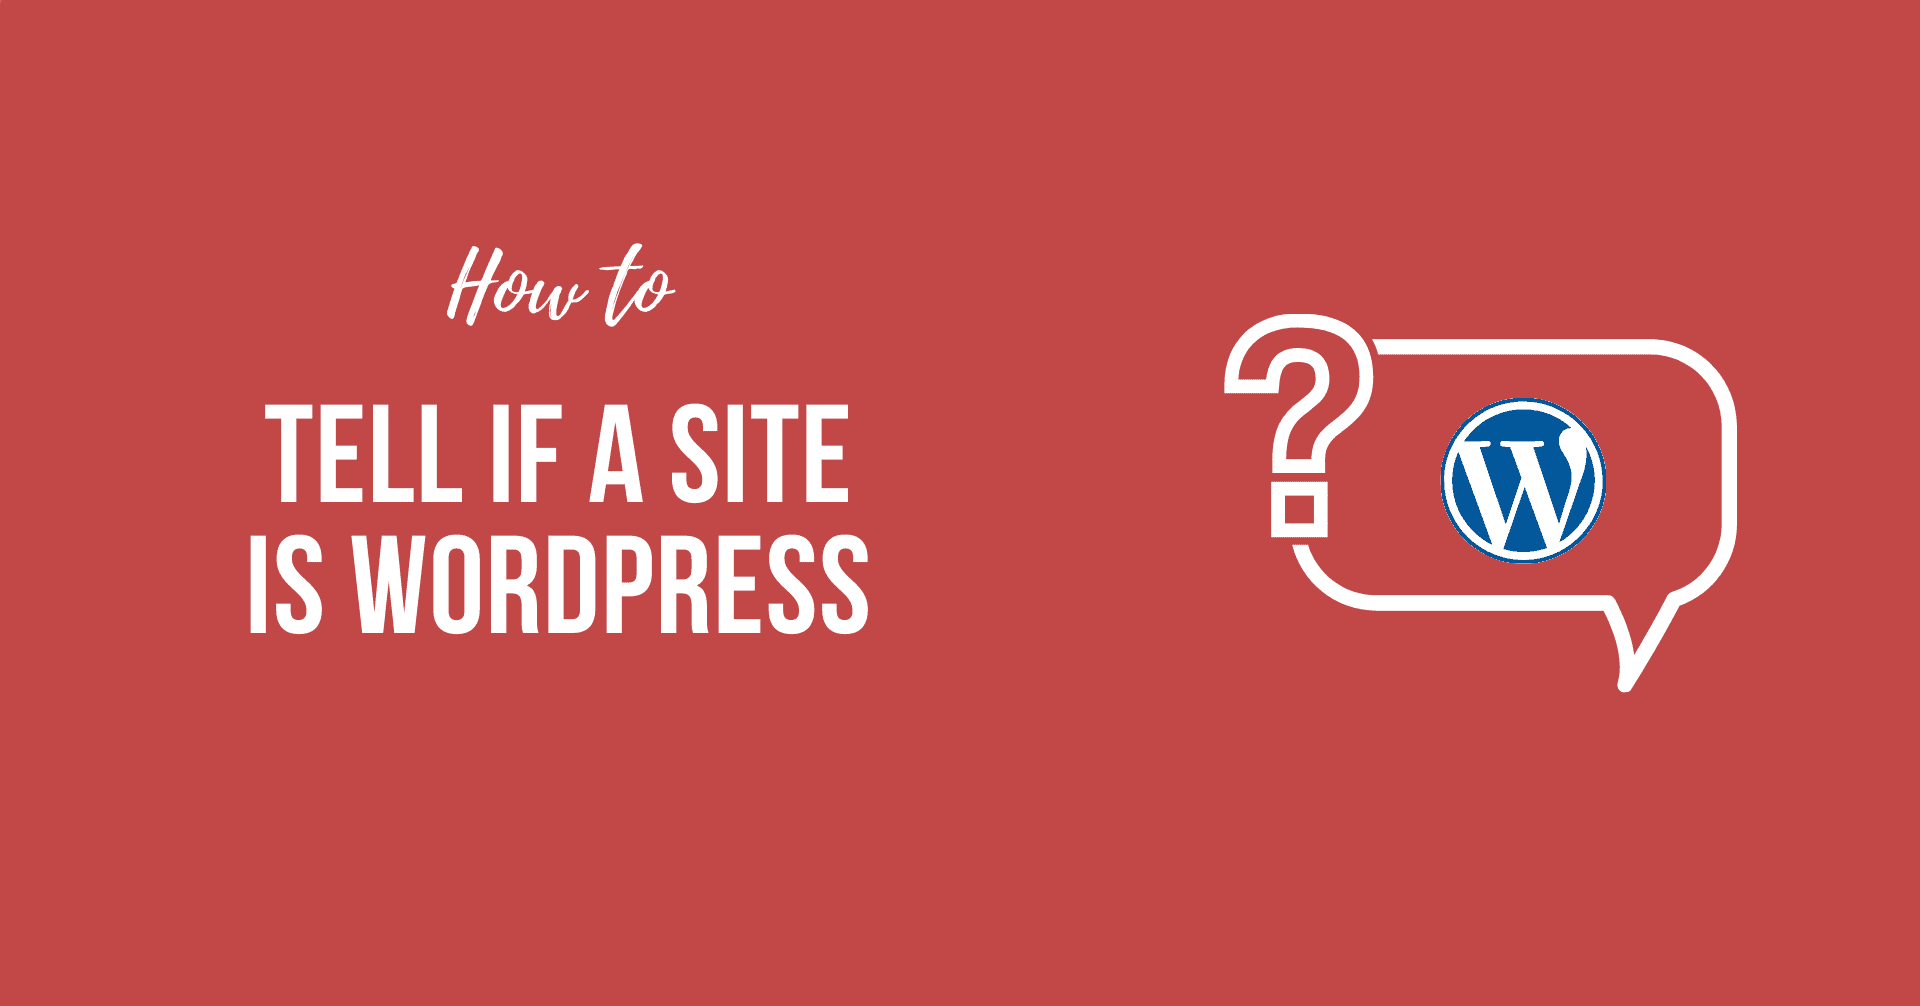 How to tell if a site is WordPress